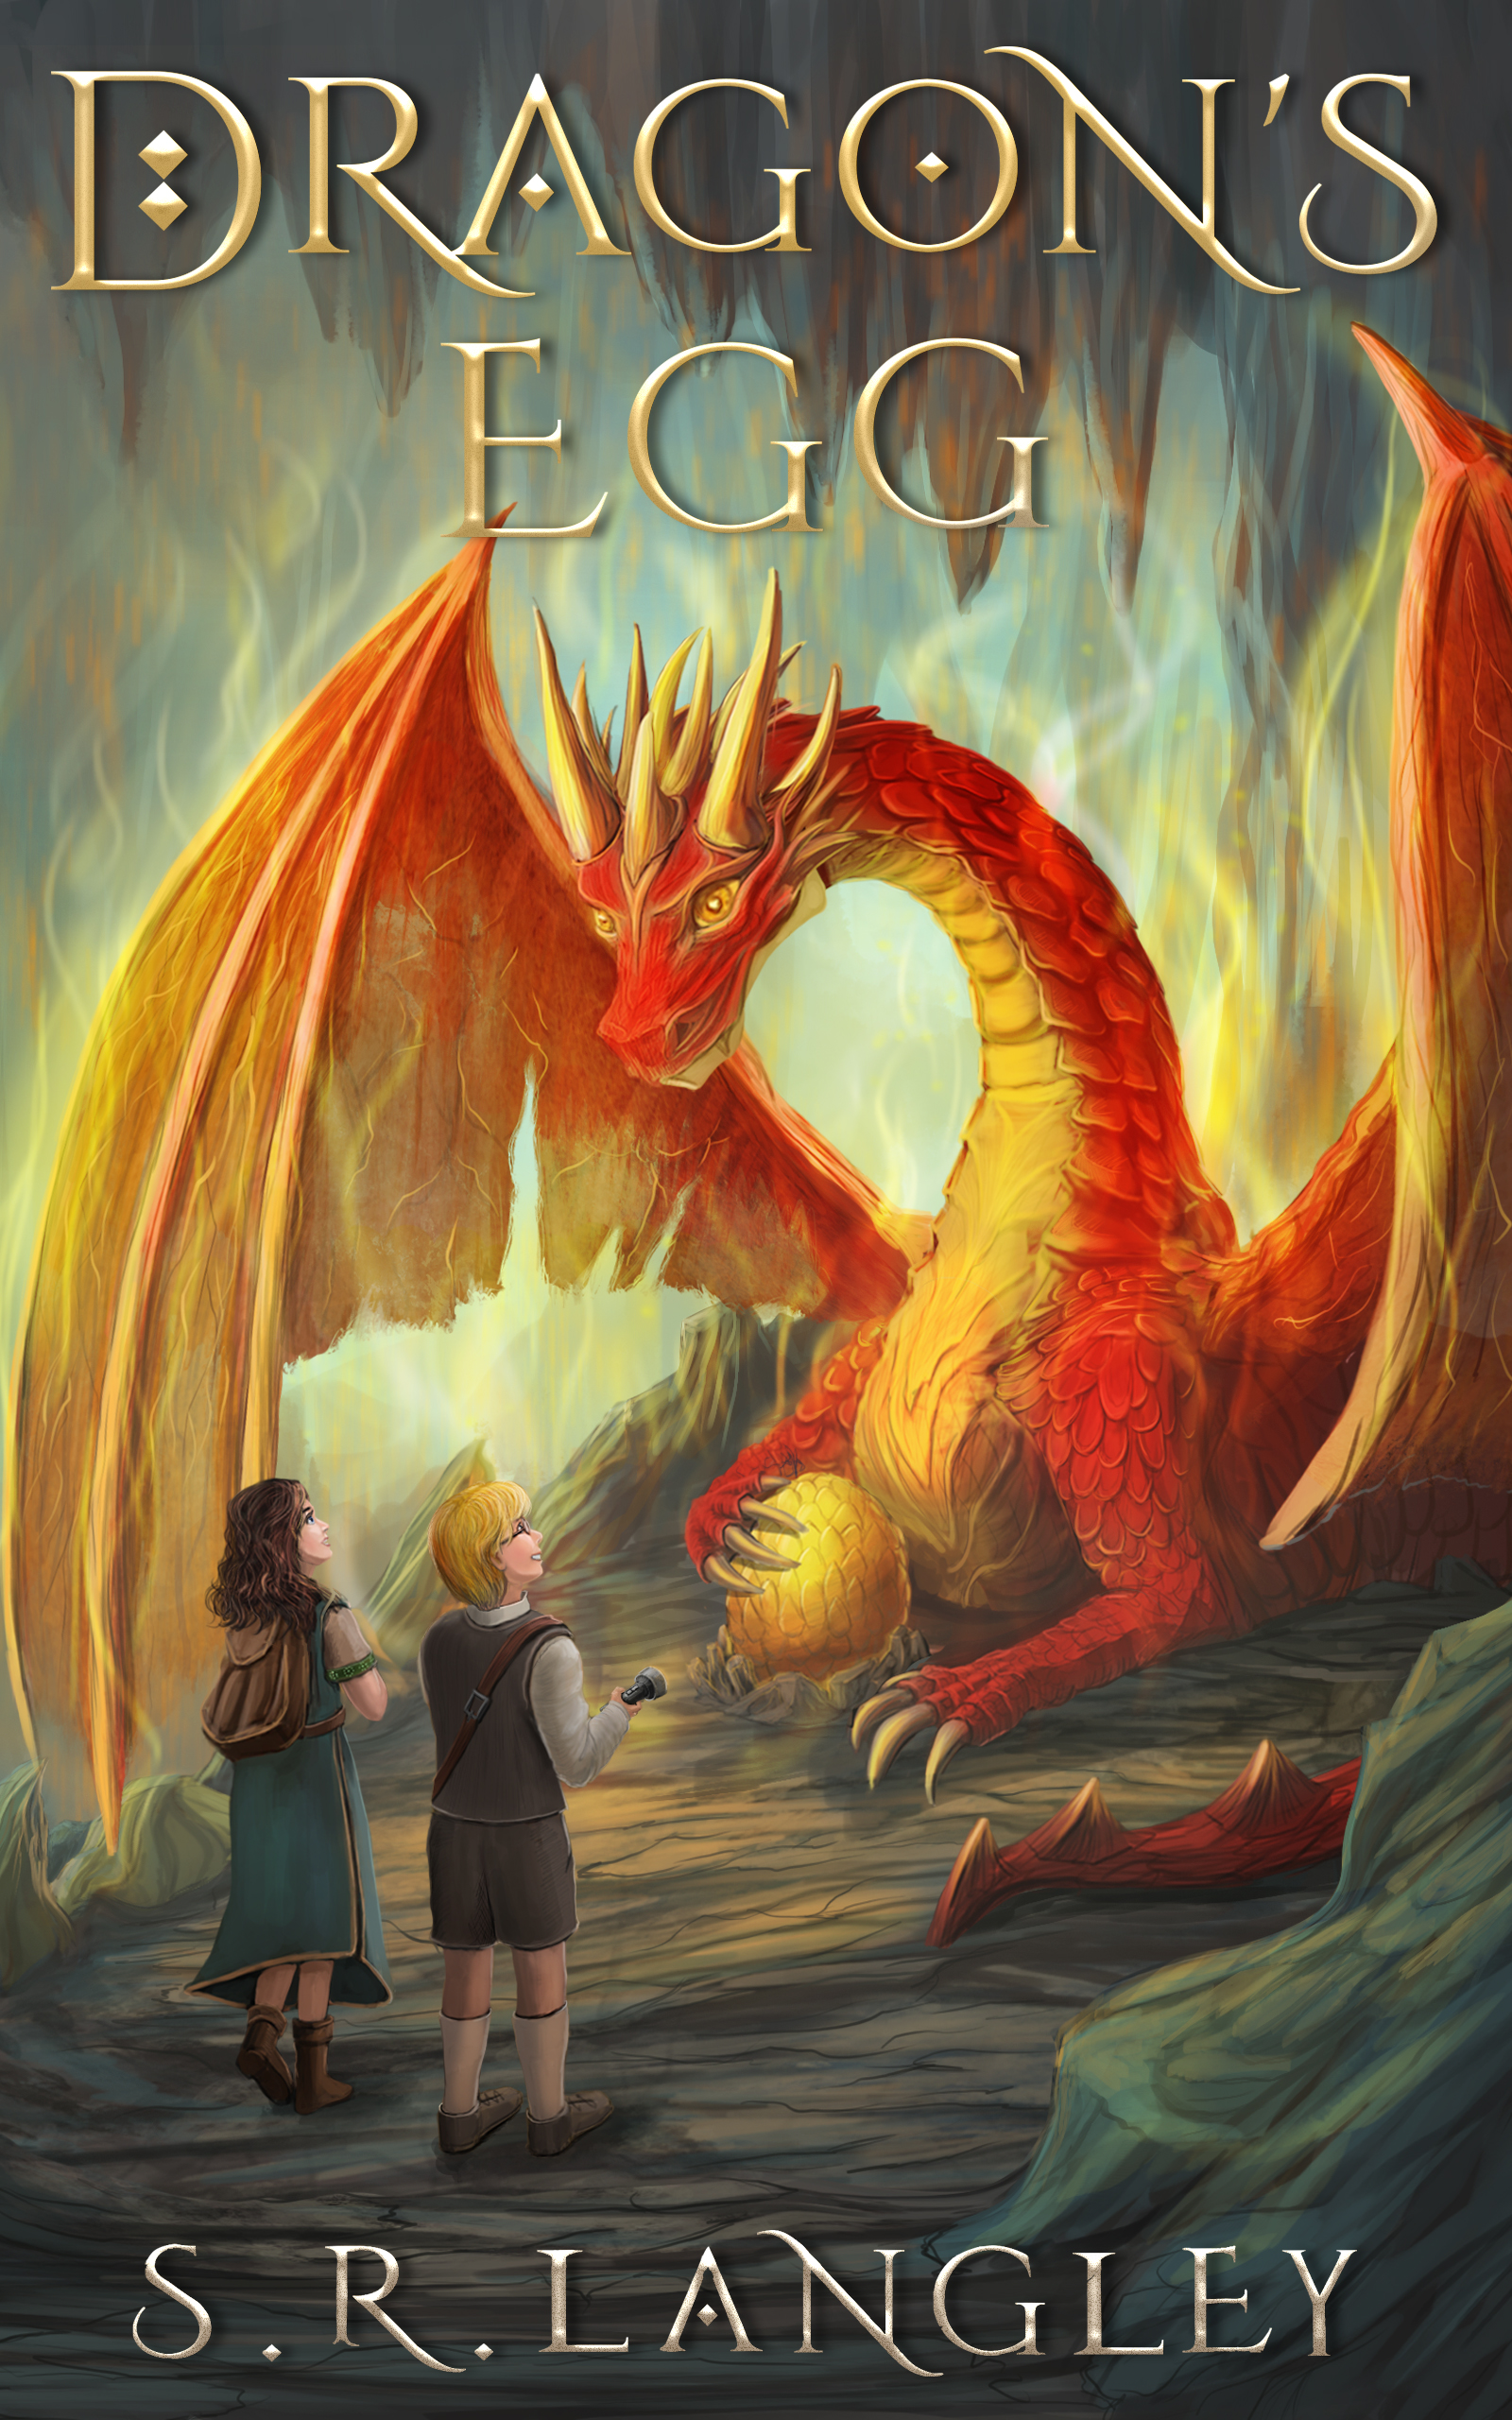 FREE: Dragon’s Egg by S. R. Langley